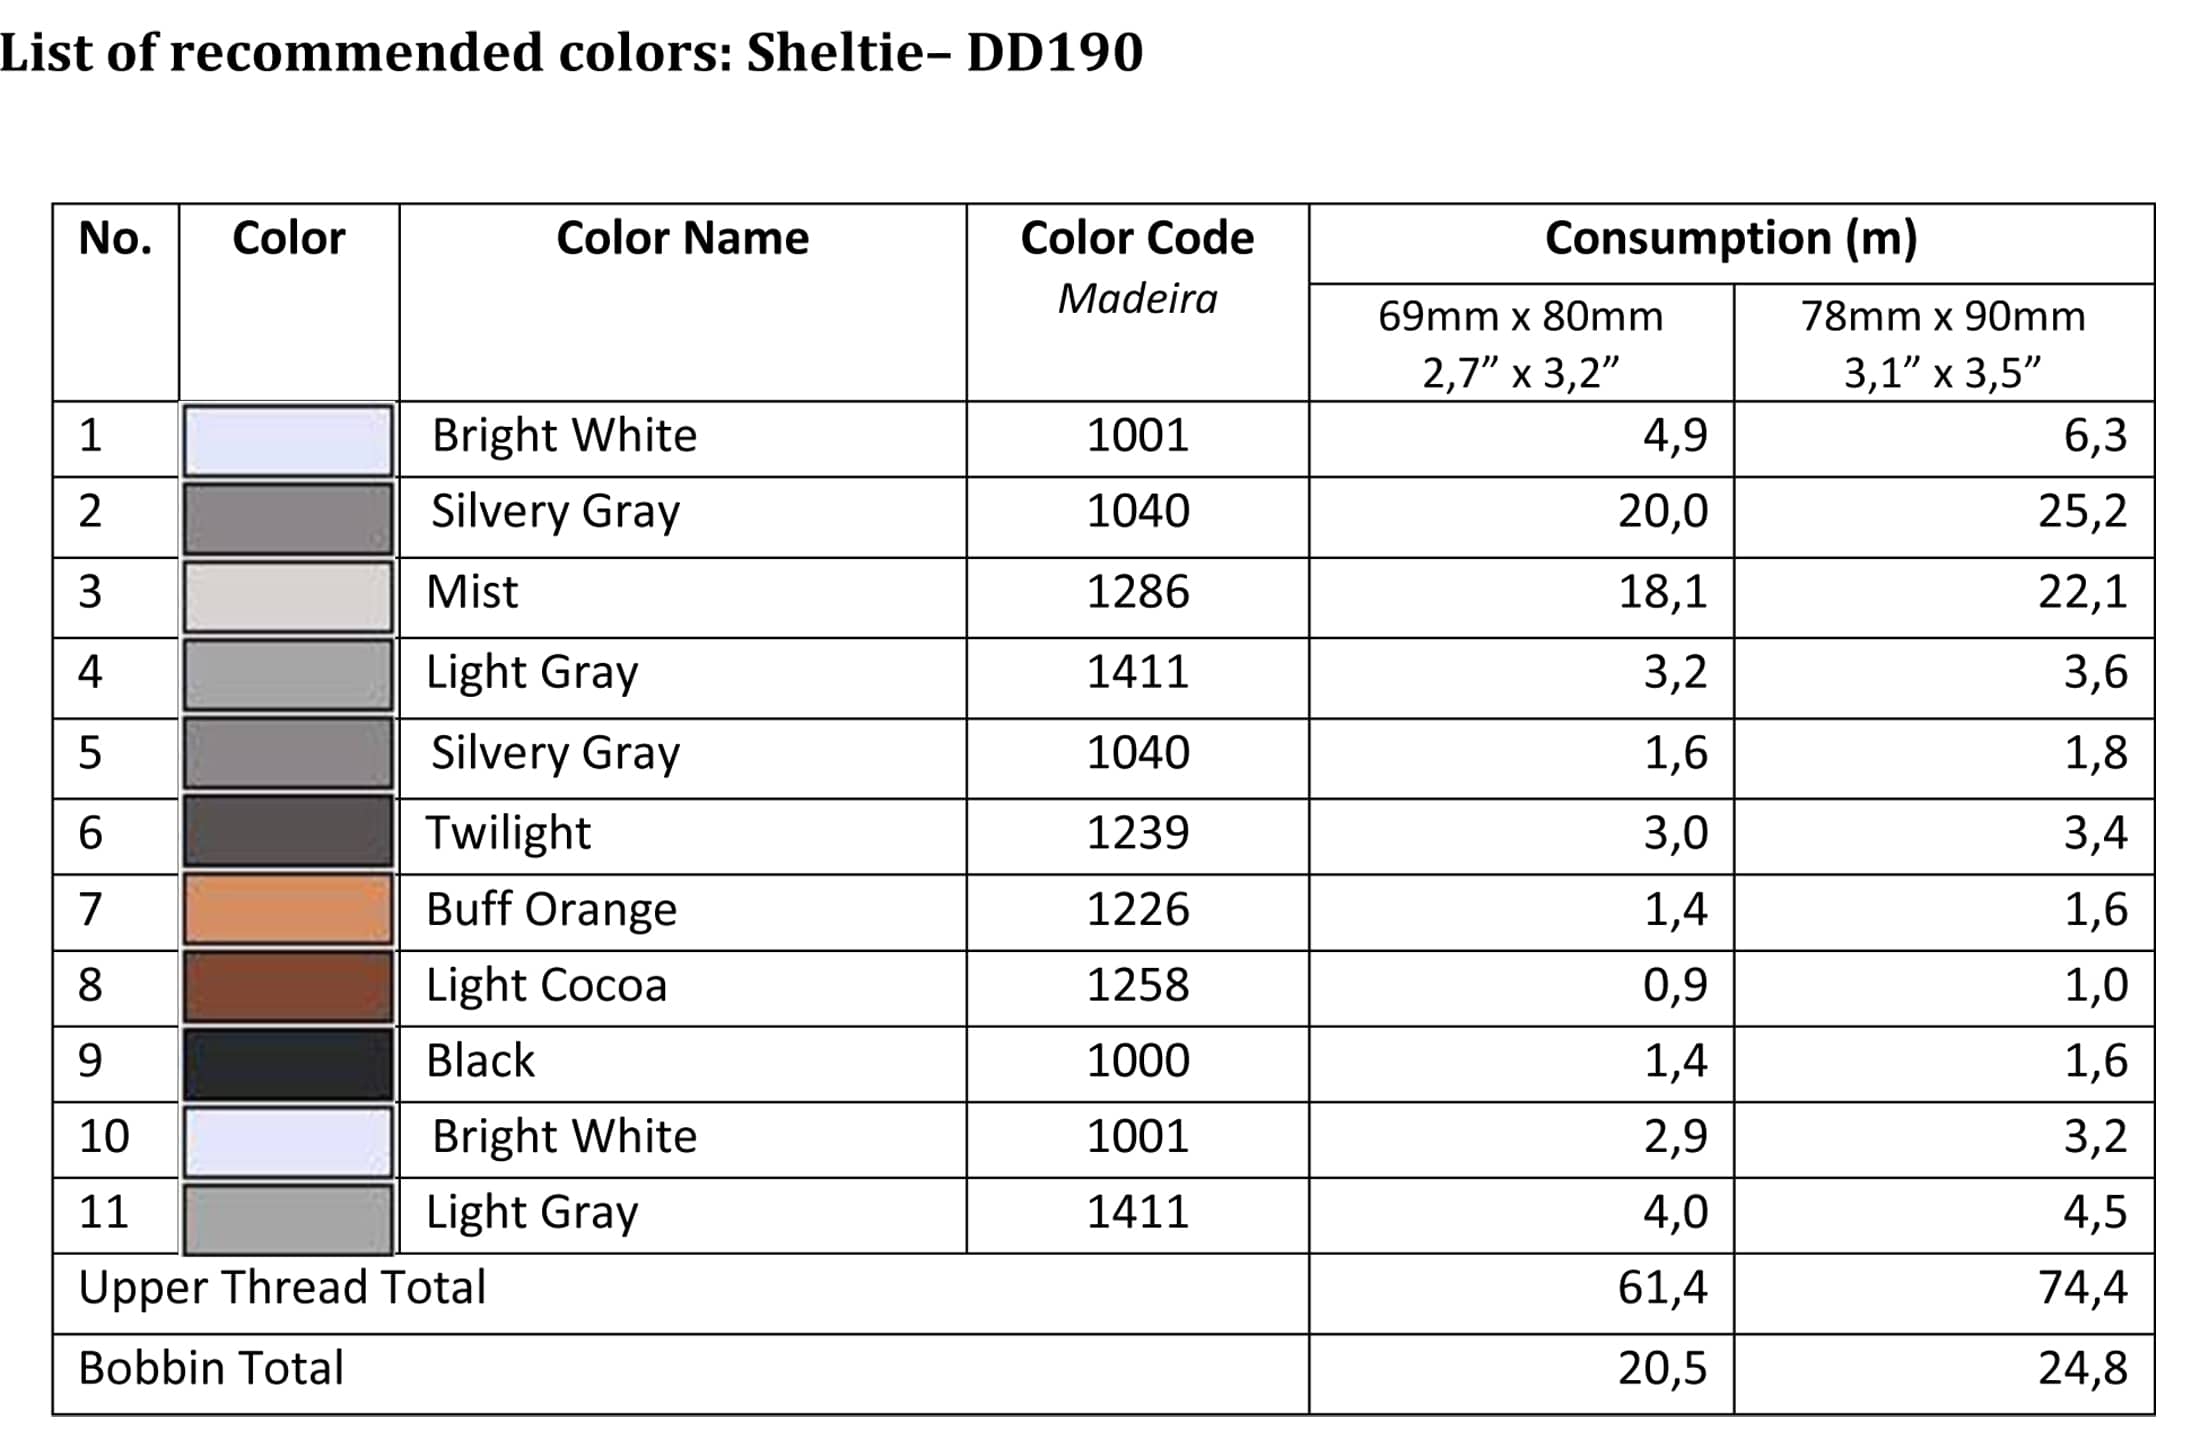 List of recommended colors - DD190